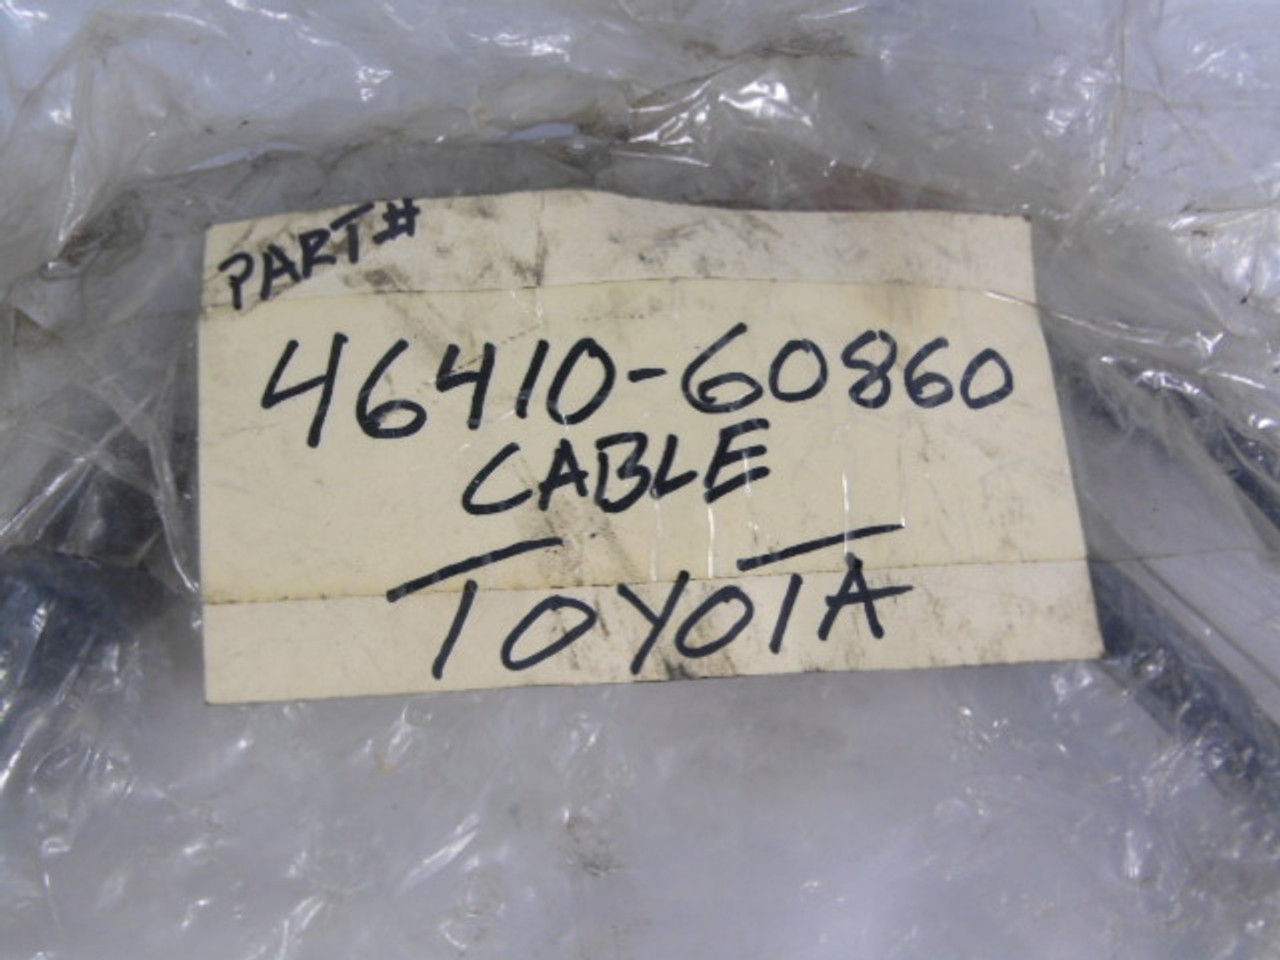 Toyota 46410-60860 Parking Cable Assembly USED